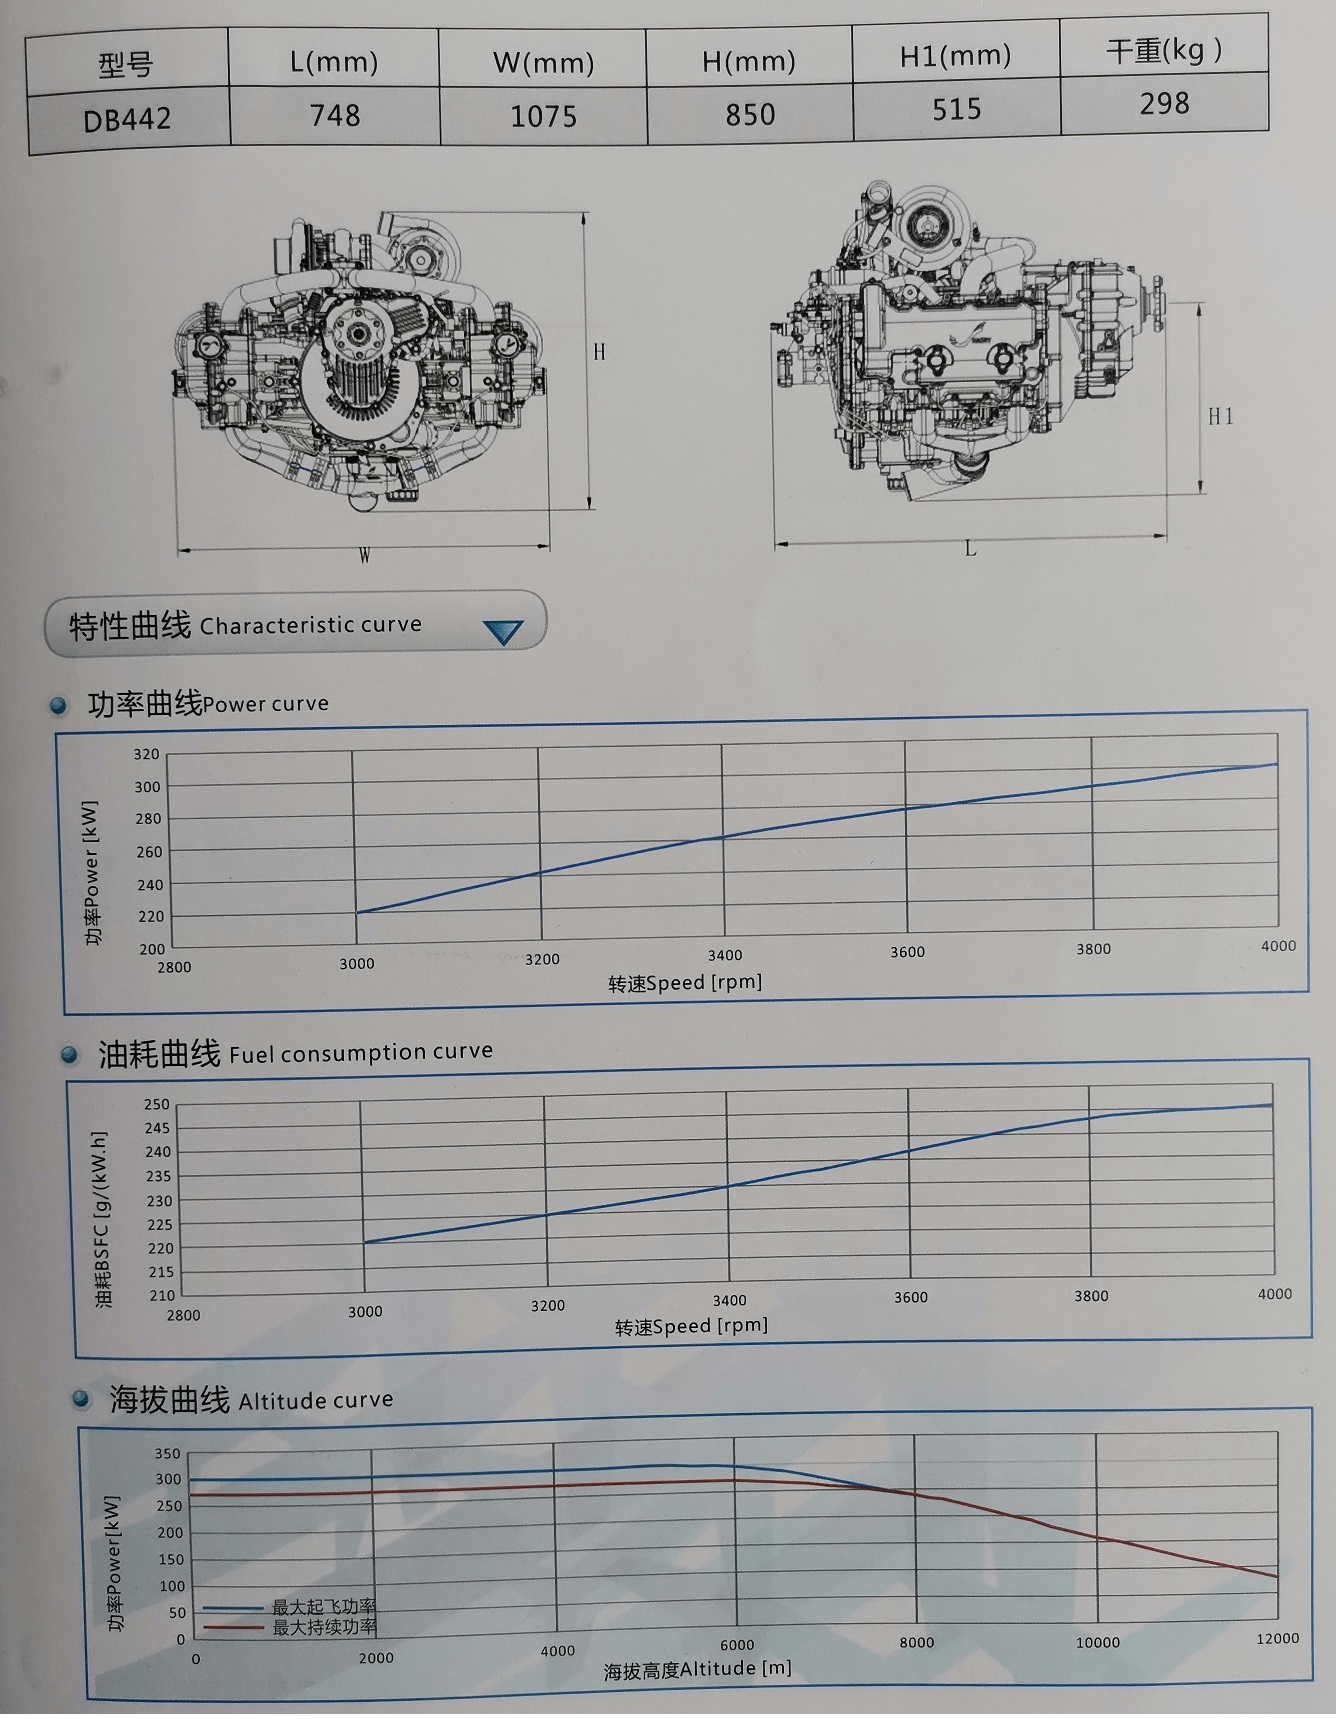 300kW military drone heavy fuel engine characteristic curve